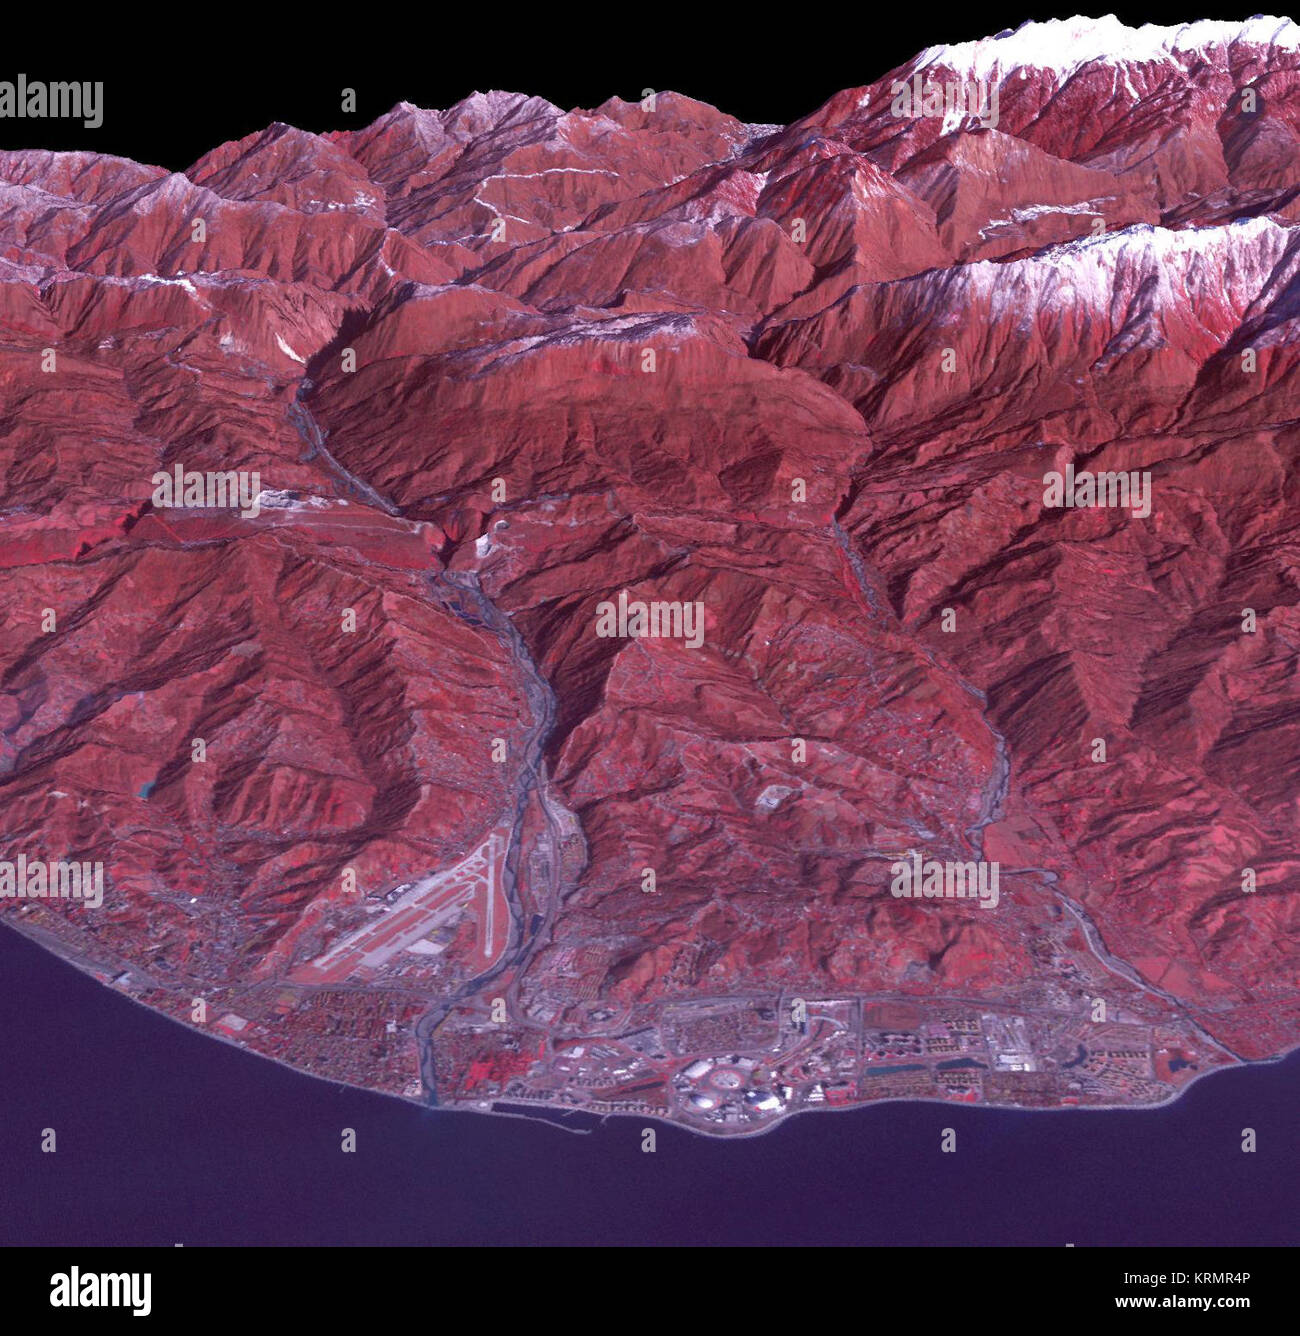 Sochi, Russia Winter Olympic Sites (Coastal Cluster)  The Black Sea resort of Sochi, Russia, is the warmest city ever to host the Winter Olympic Games, which open on Feb. 7, 2014, and run through Feb. 23. This north-looking image, acquired on Jan. 4, 2014, by the Advanced Spaceborne Thermal Emission and Reflection Radiometer (ASTER) instrument on NASA's Terra spacecraft, shows the Sochi Olympic Park Coastal Cluster -- the circular area on the shoreline in the bottom center of the image -- which was built for Olympic indoor sports. Even curling has its own arena alongside multiple arenas for ho Stock Photo